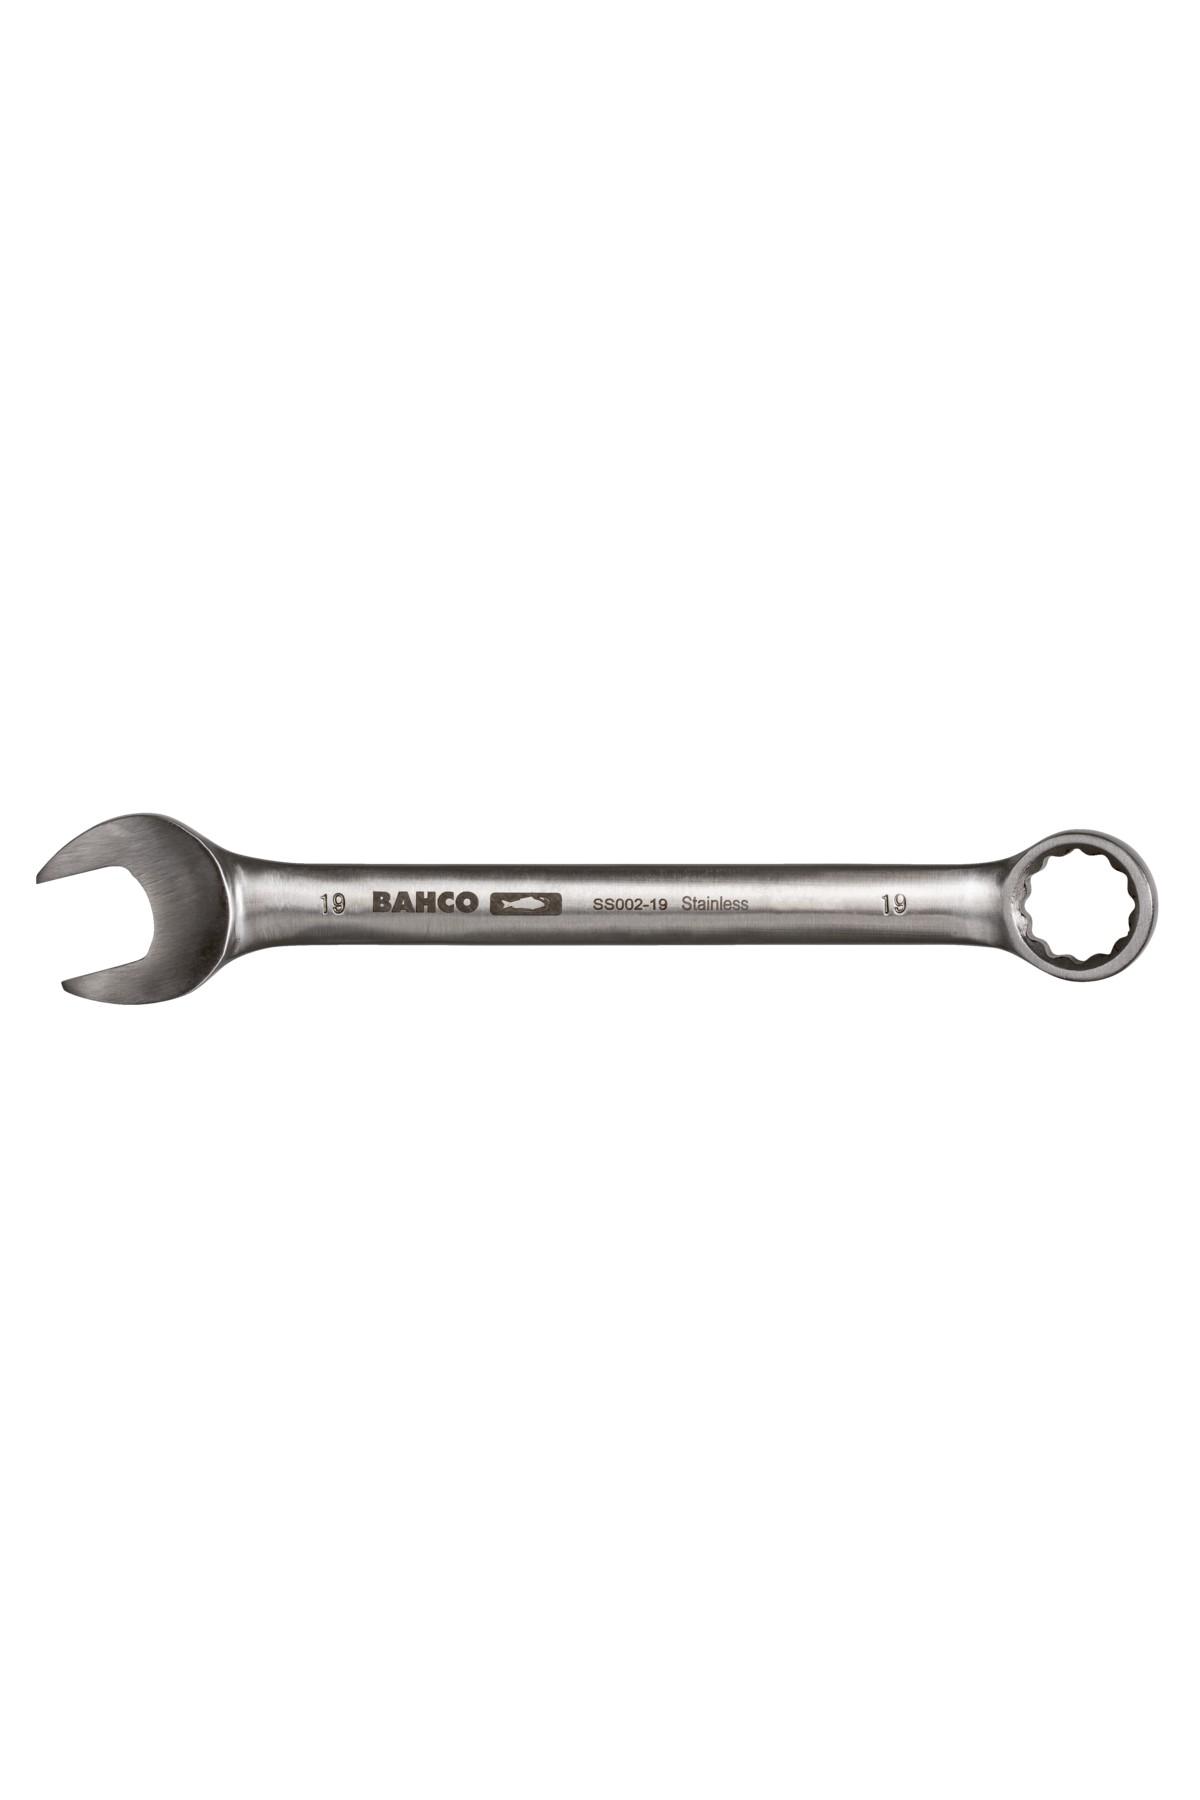 Ring spanner stainless 32mm